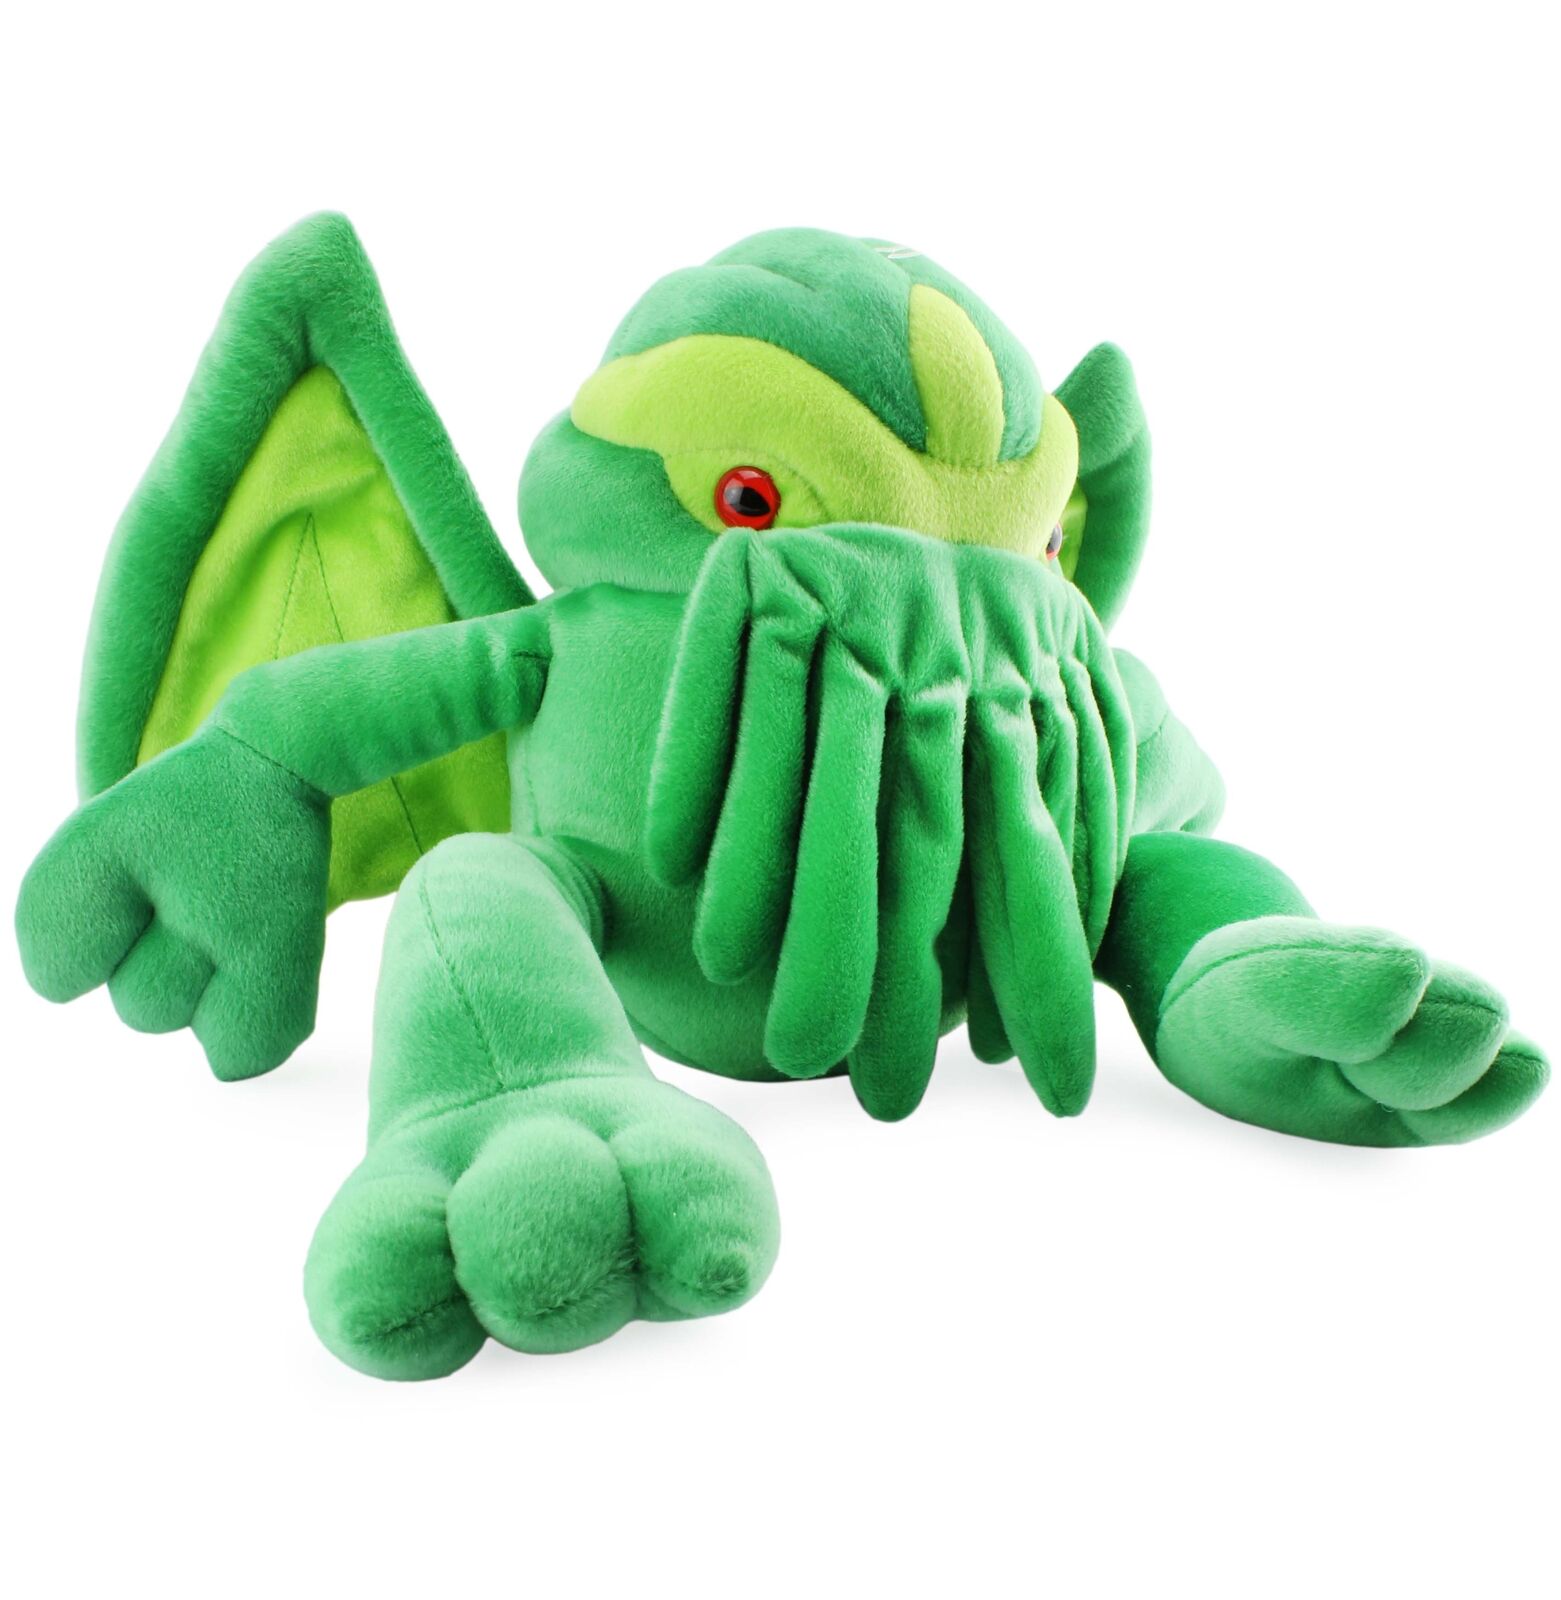 Large Cthulhu Plush, 16in by Toy Vault, Stuffed Toy Inspired by HP Lovecraft